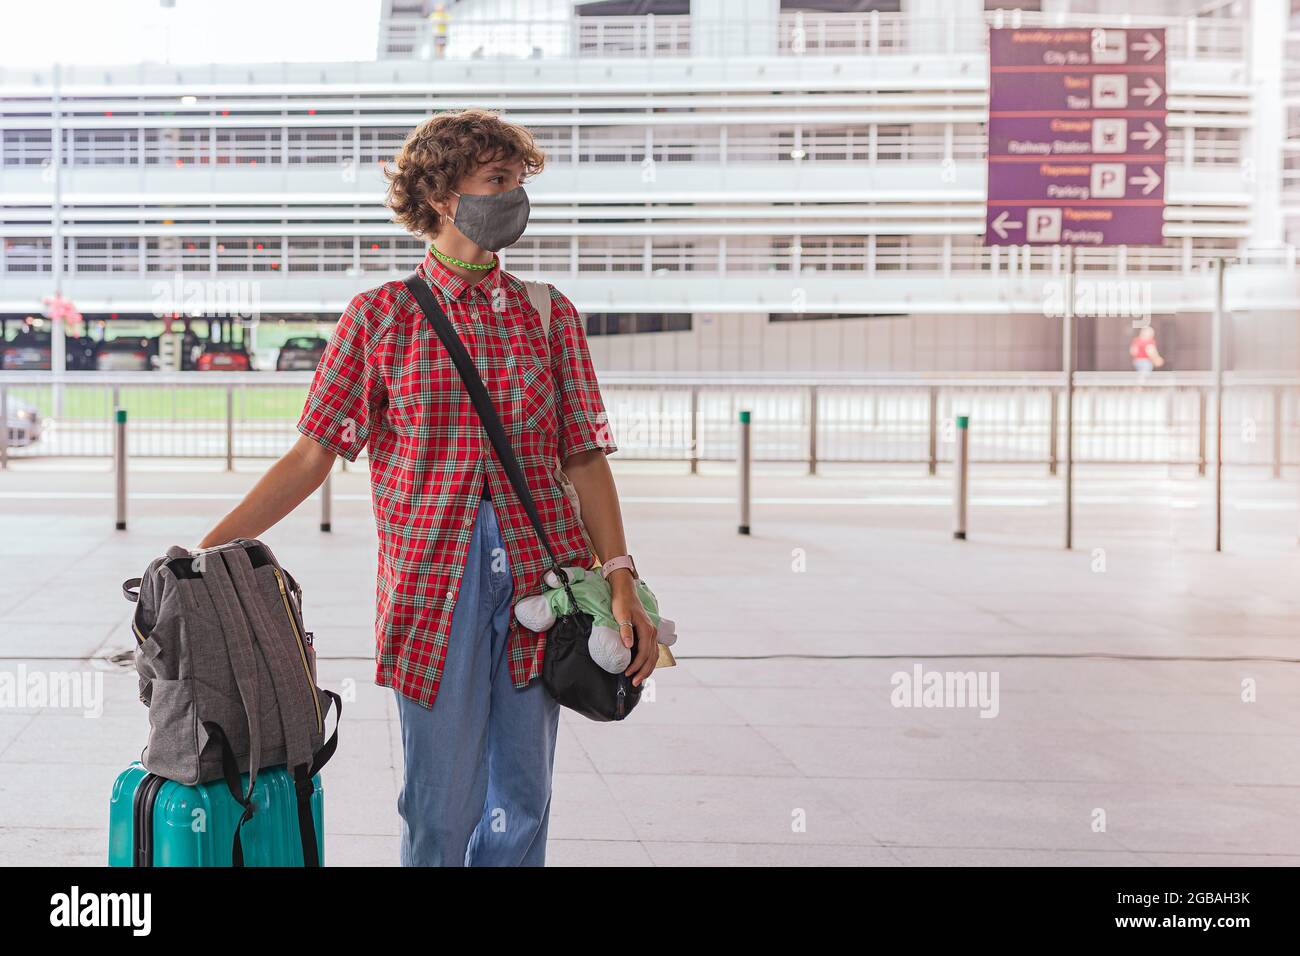 Portrait of attractive teenage girl with curly hair in protective mask with luggage for travel on blurred background of airport building Stock Photo